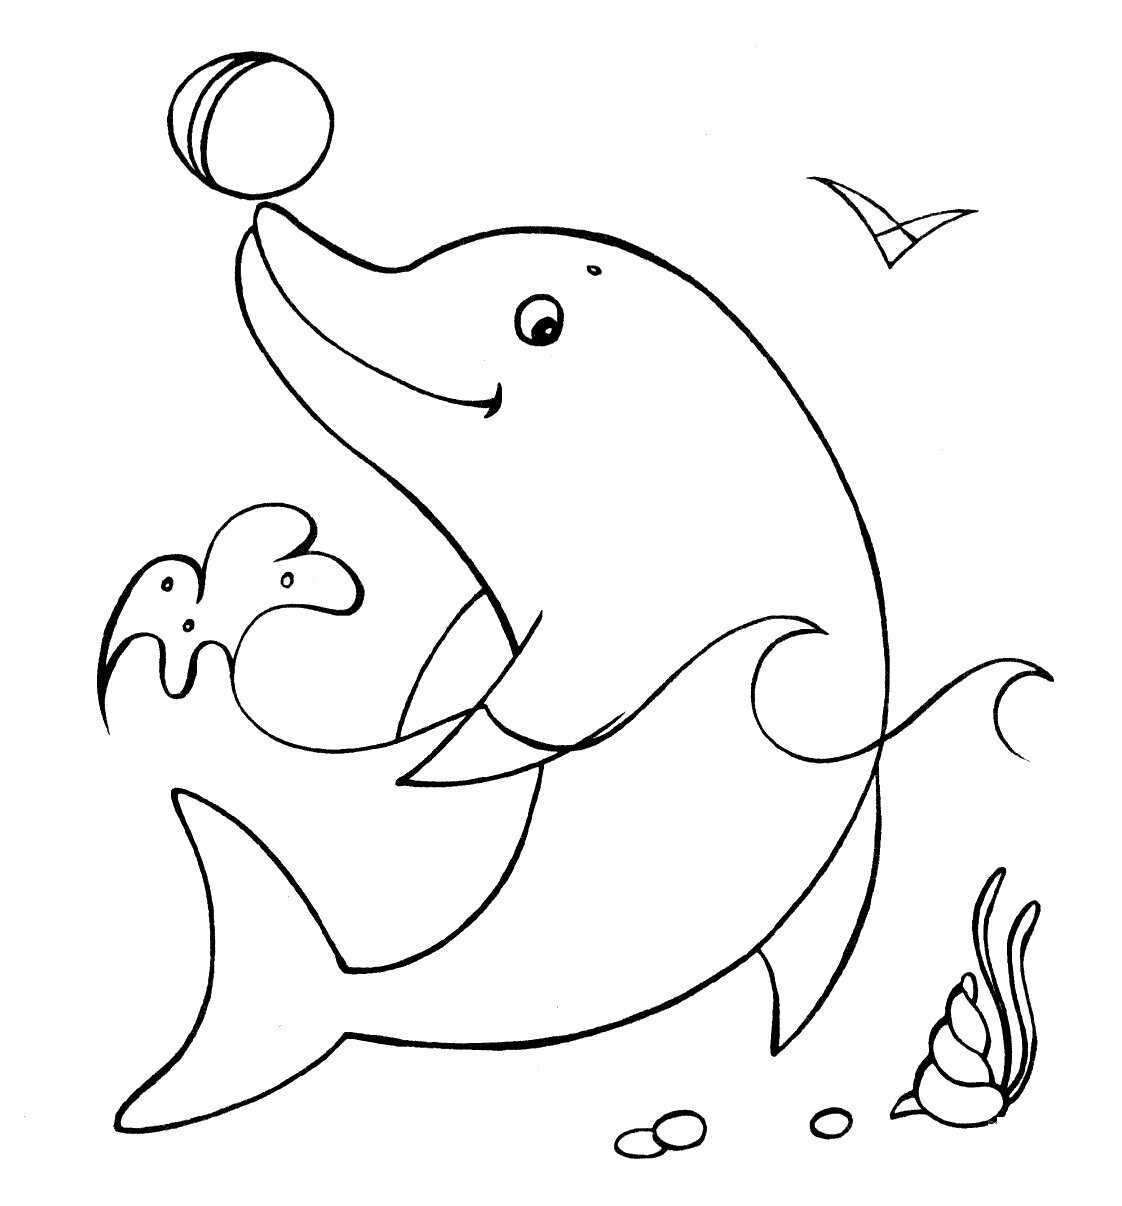 Dolphin playing with ball Coloring Page